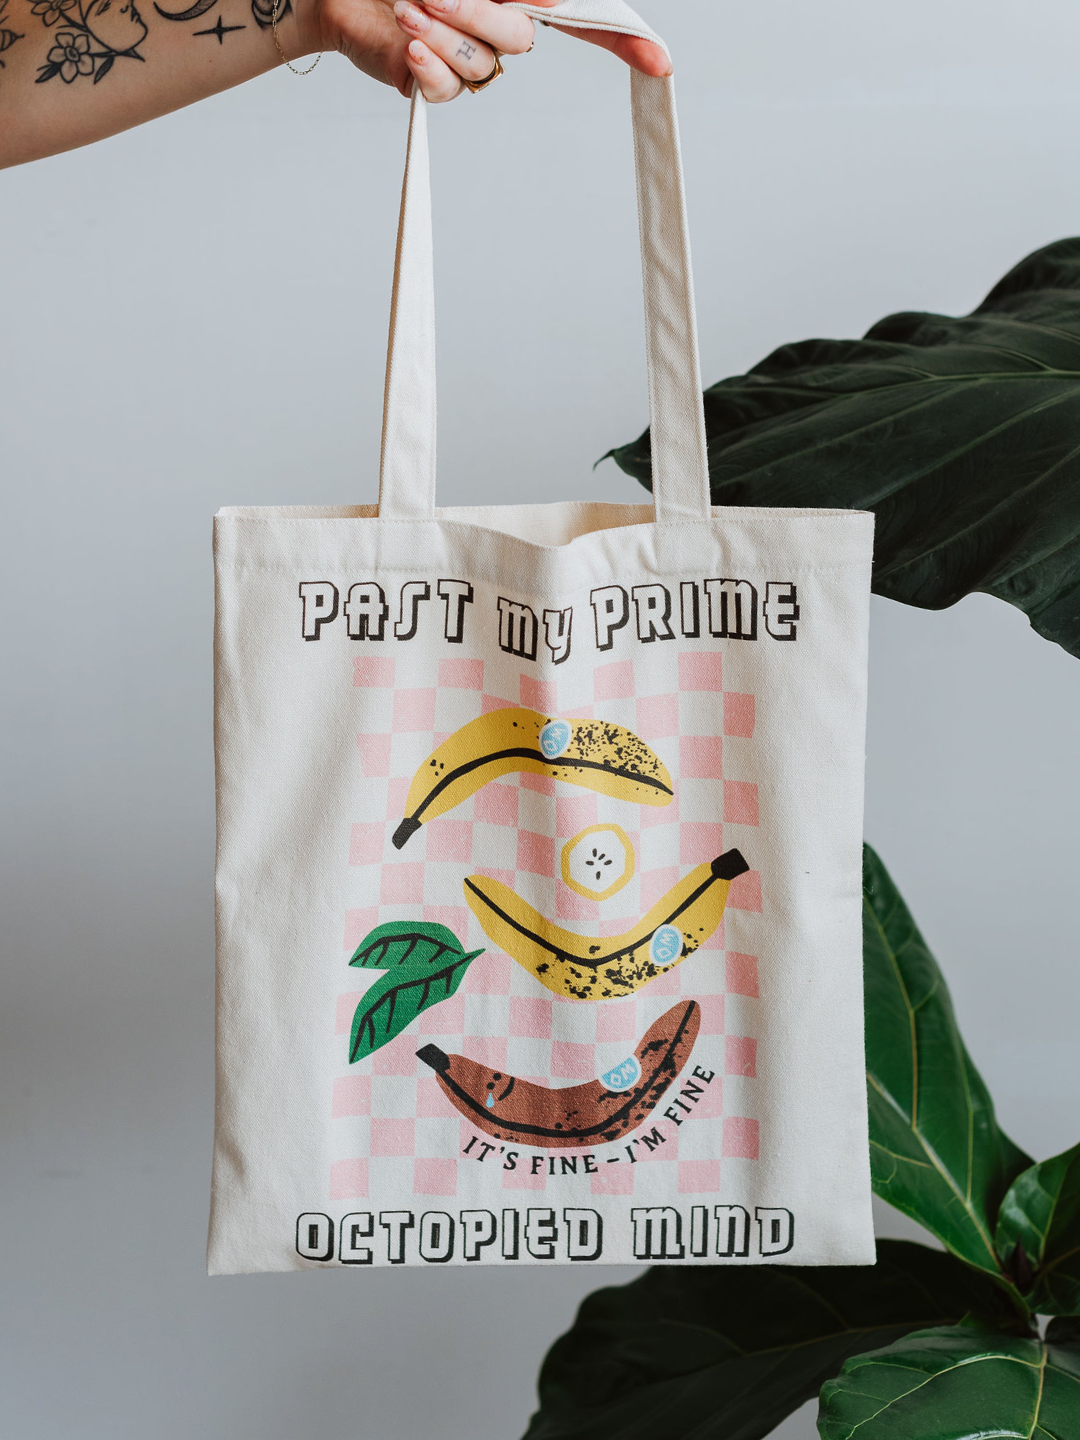 Past My Prime Tote Bag - Octopied Mind